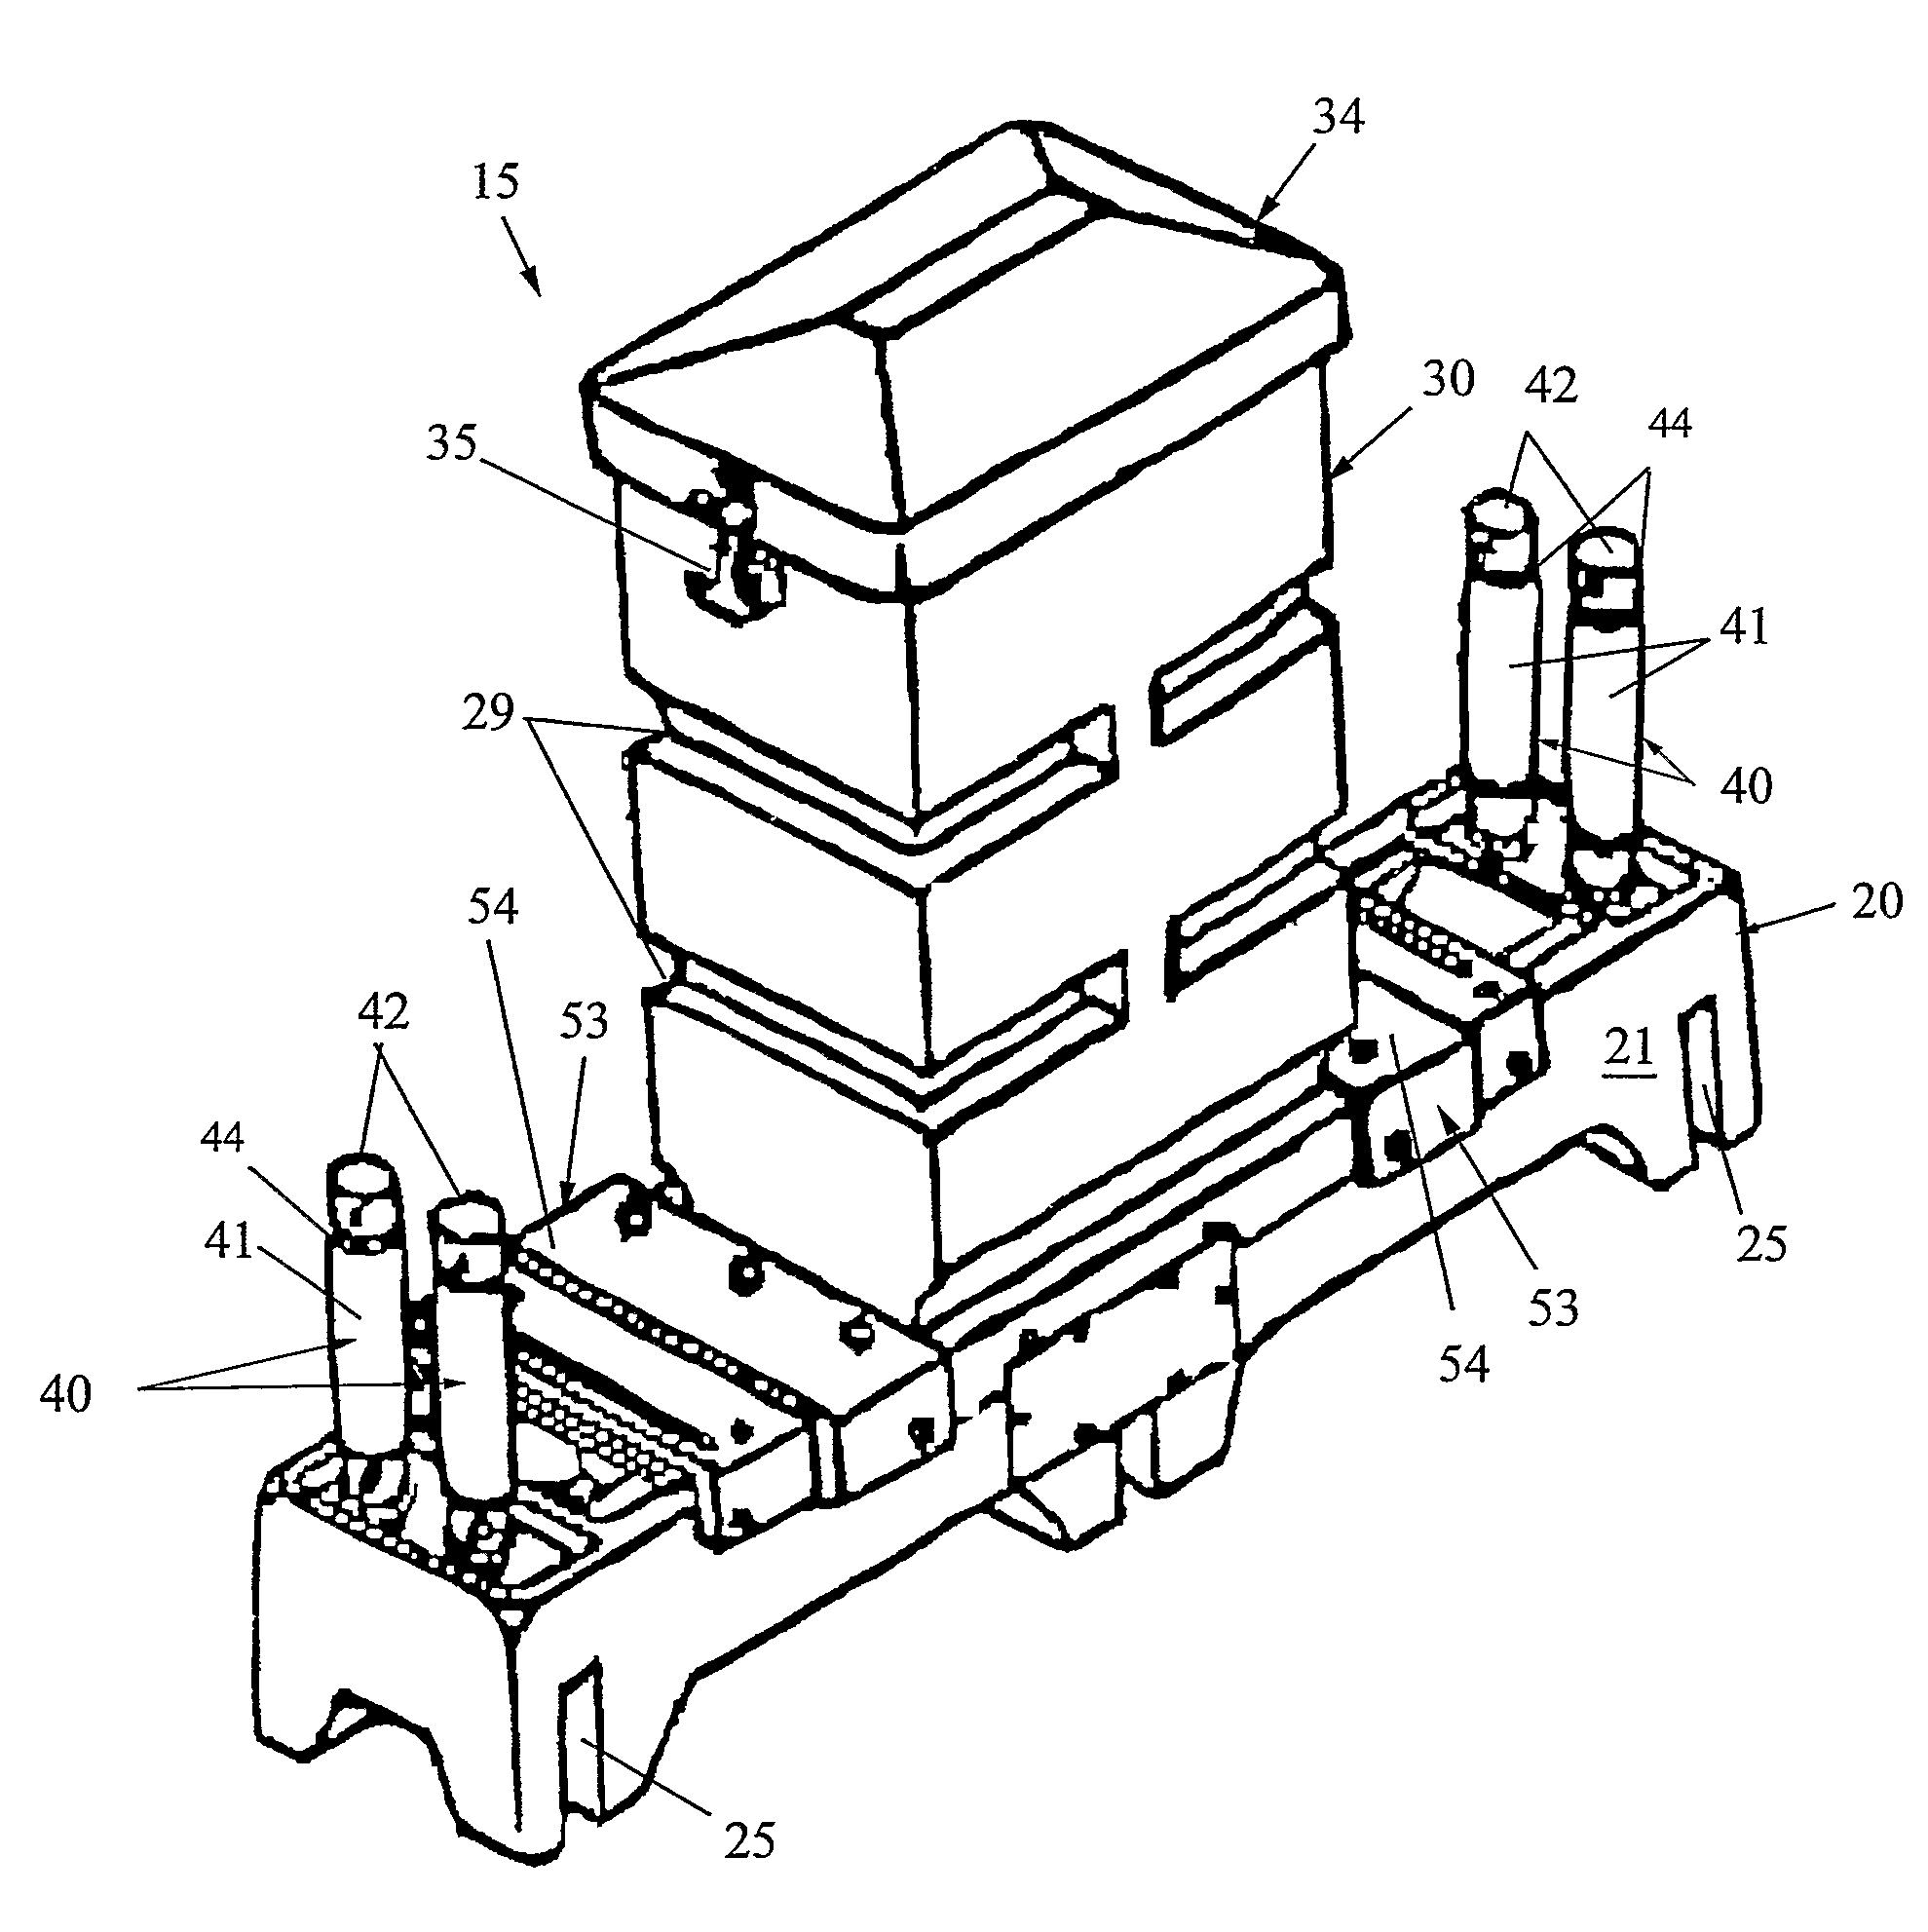 Apparatus for use in controlling the spread of ectoparasite-borne diseases